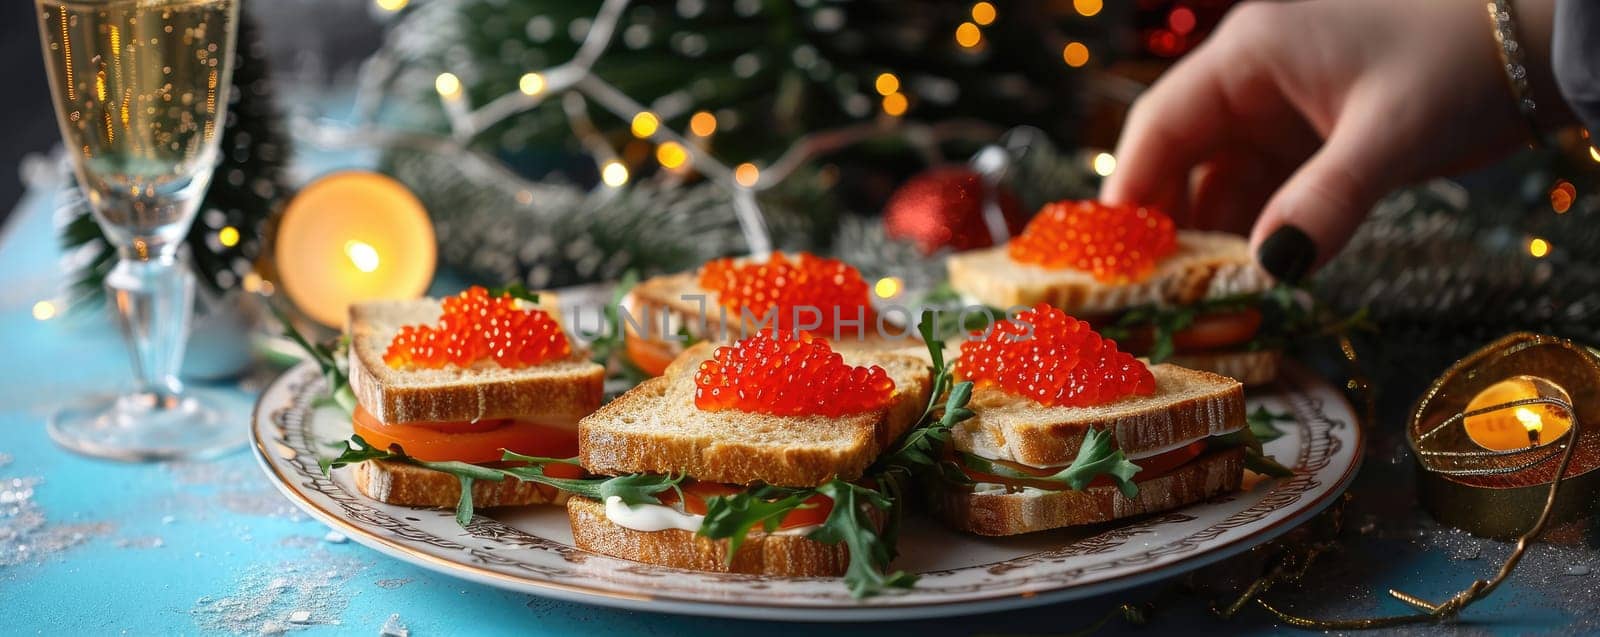 Sandwich with red caviar in a woman's hand on a festive background by Yurich32